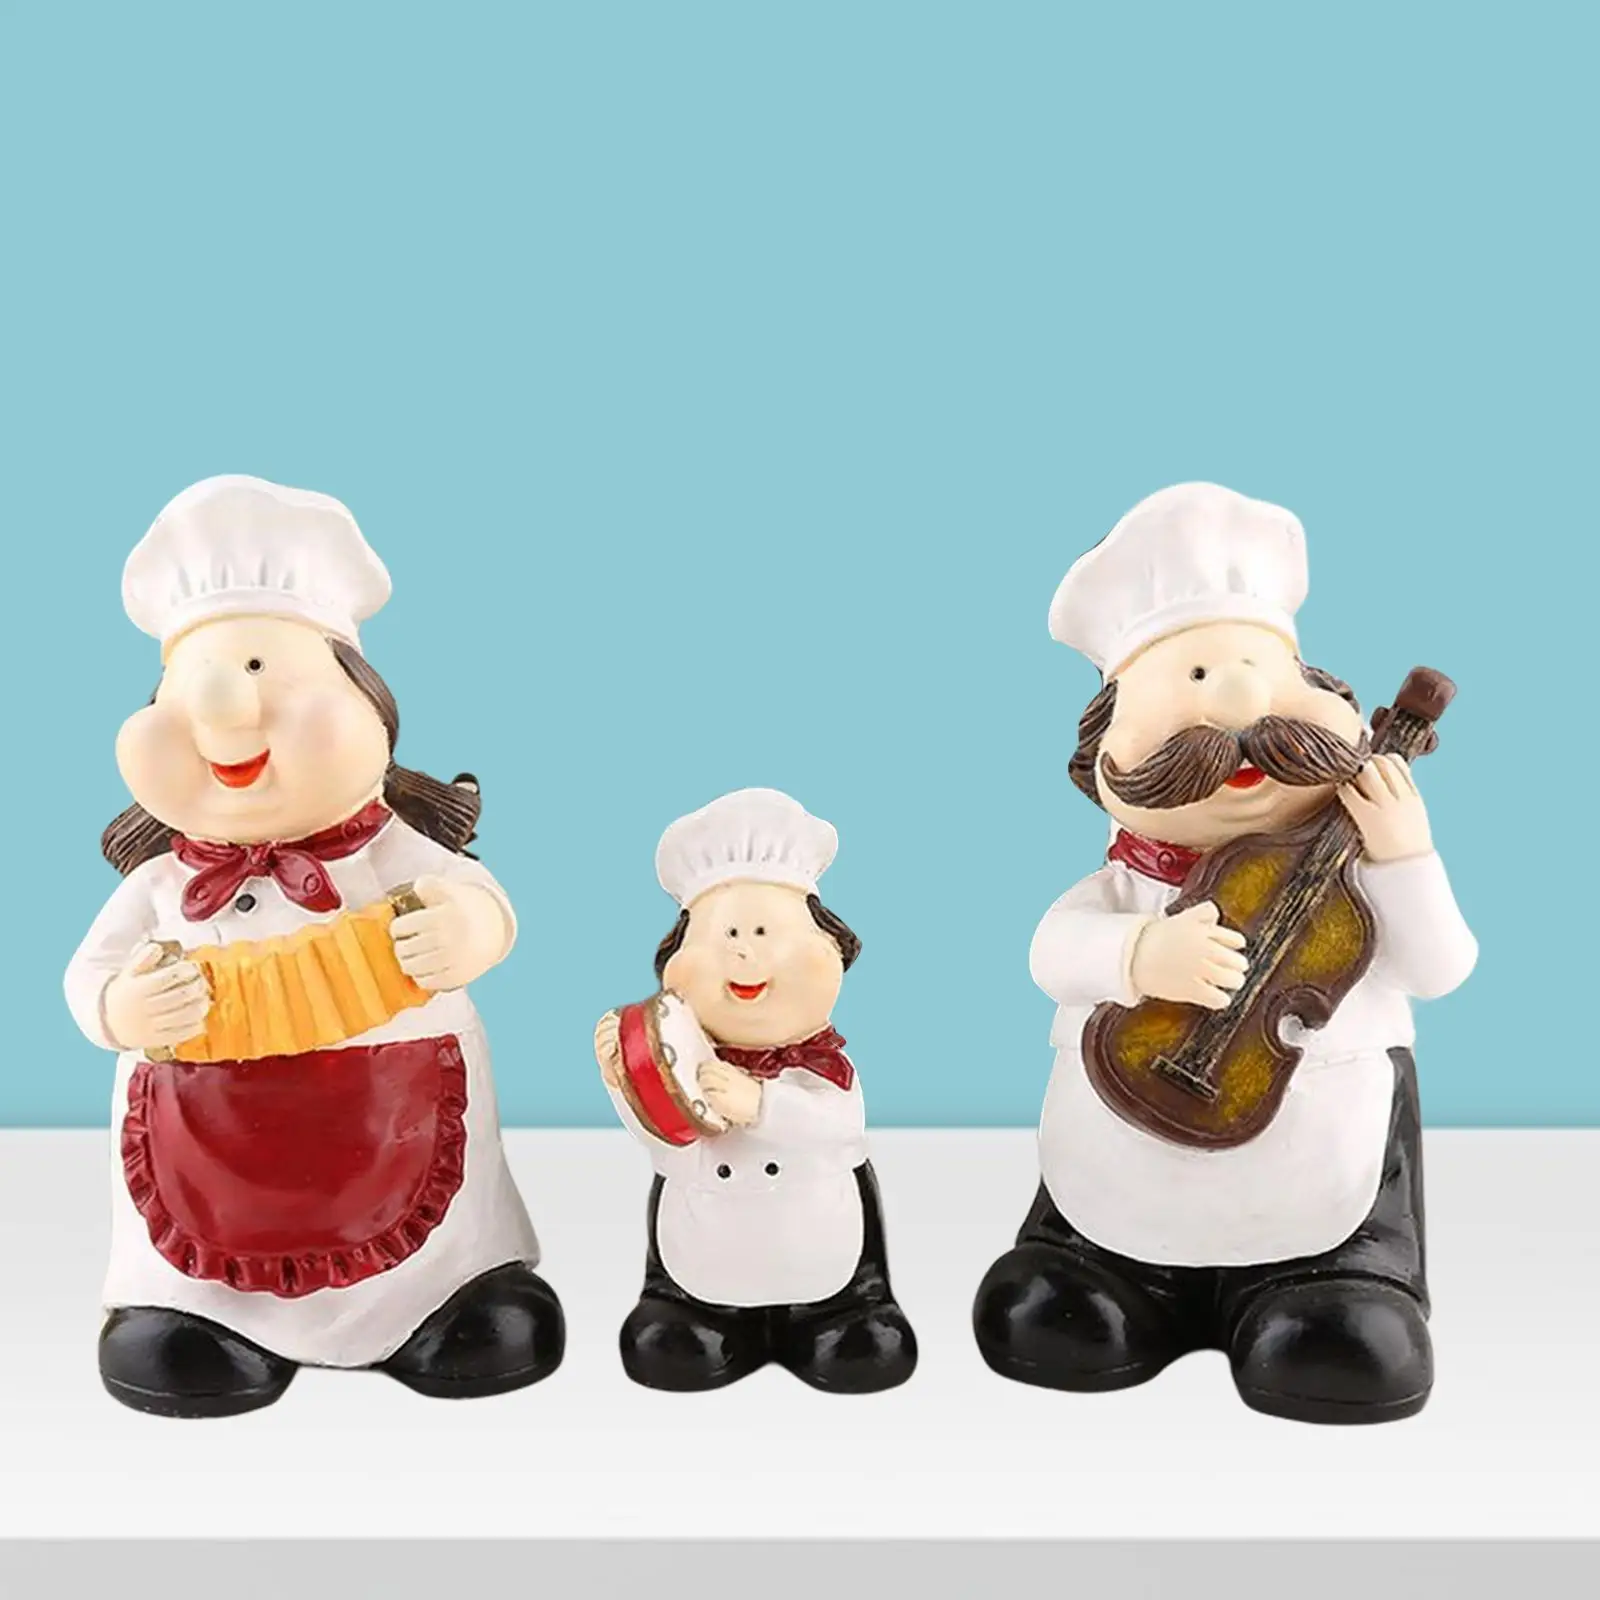 

3x Chef Statue Figurines Sculpture Resin Ornaments Housewarming Gift Cooking Craft Tabletop Model Cook Cafe Home Shop Coffee